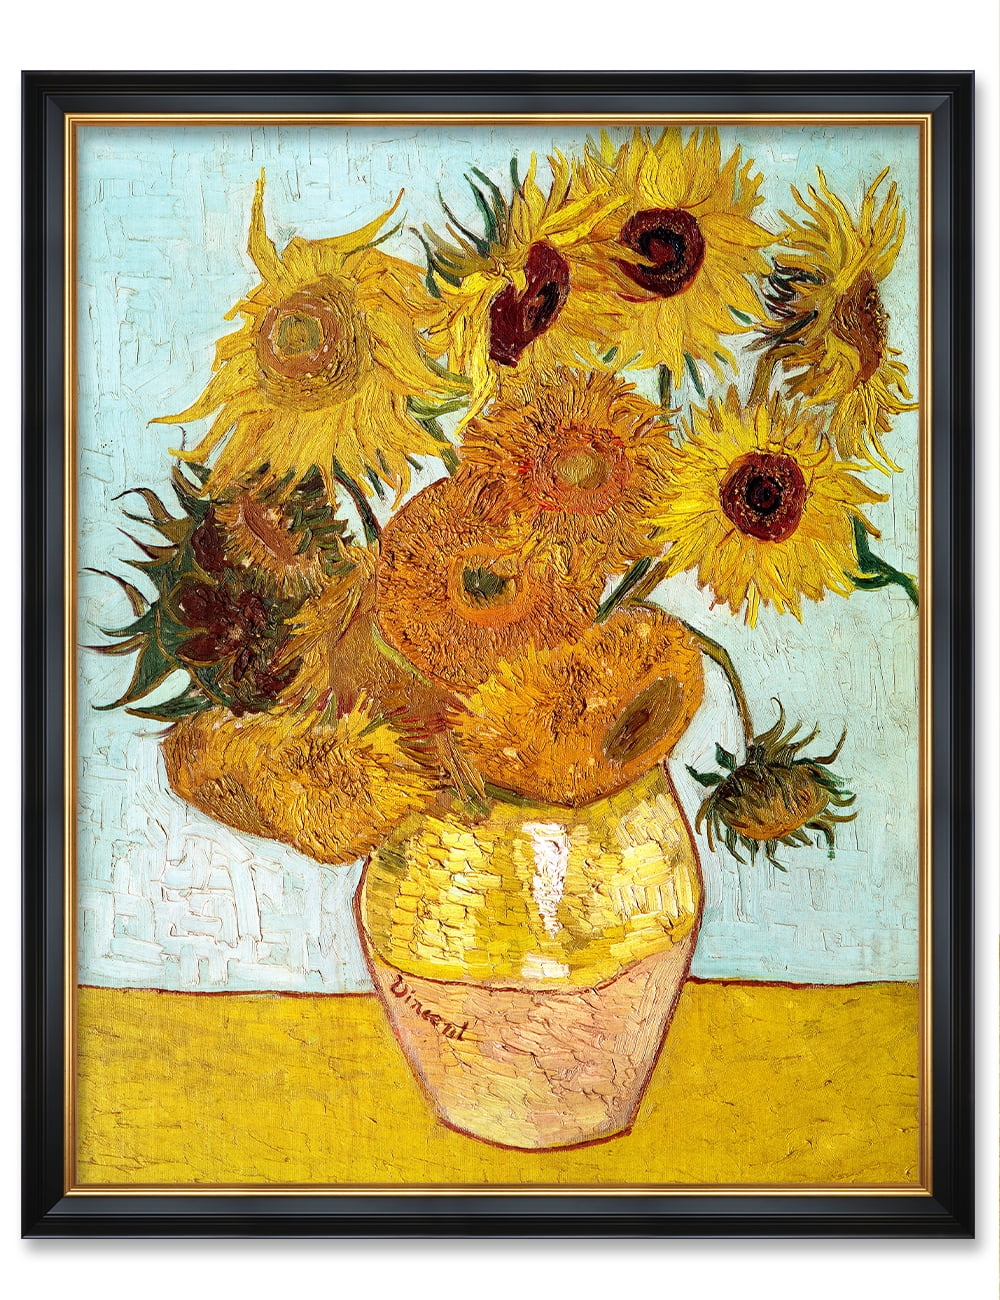 DECORARTS Twelve Sunflowers by Vincent Van Gogh Art Reproduction.  Oversize Solid Wooden Frame Matching with Giclee Prints Canvas Wall Art.  Total size: W 35